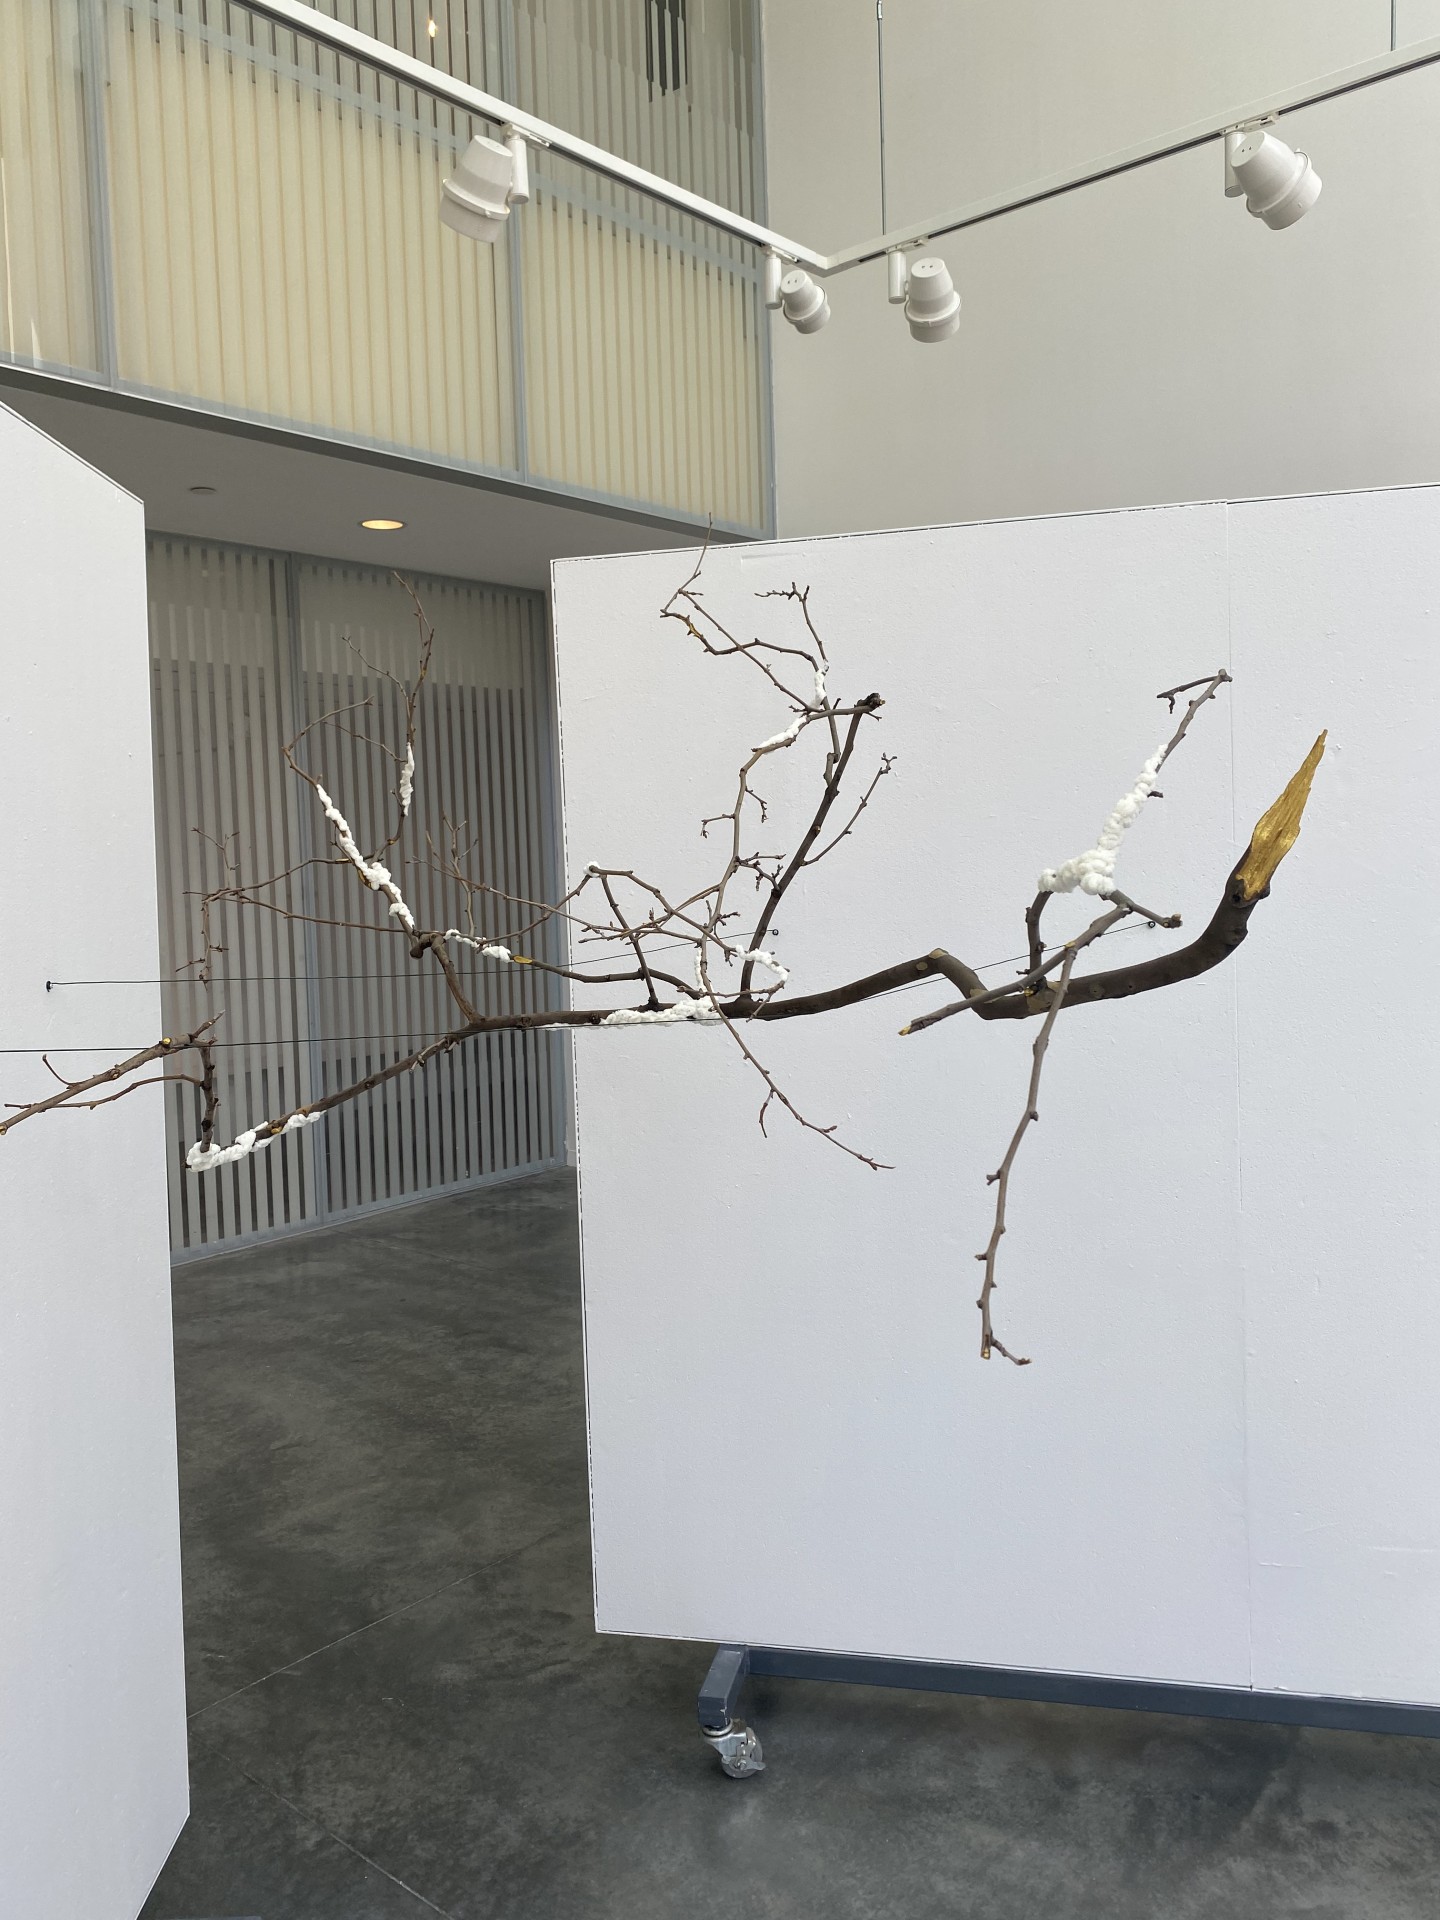 A hanging sculpture looks like a thin tree branch with some other objects hanging off it